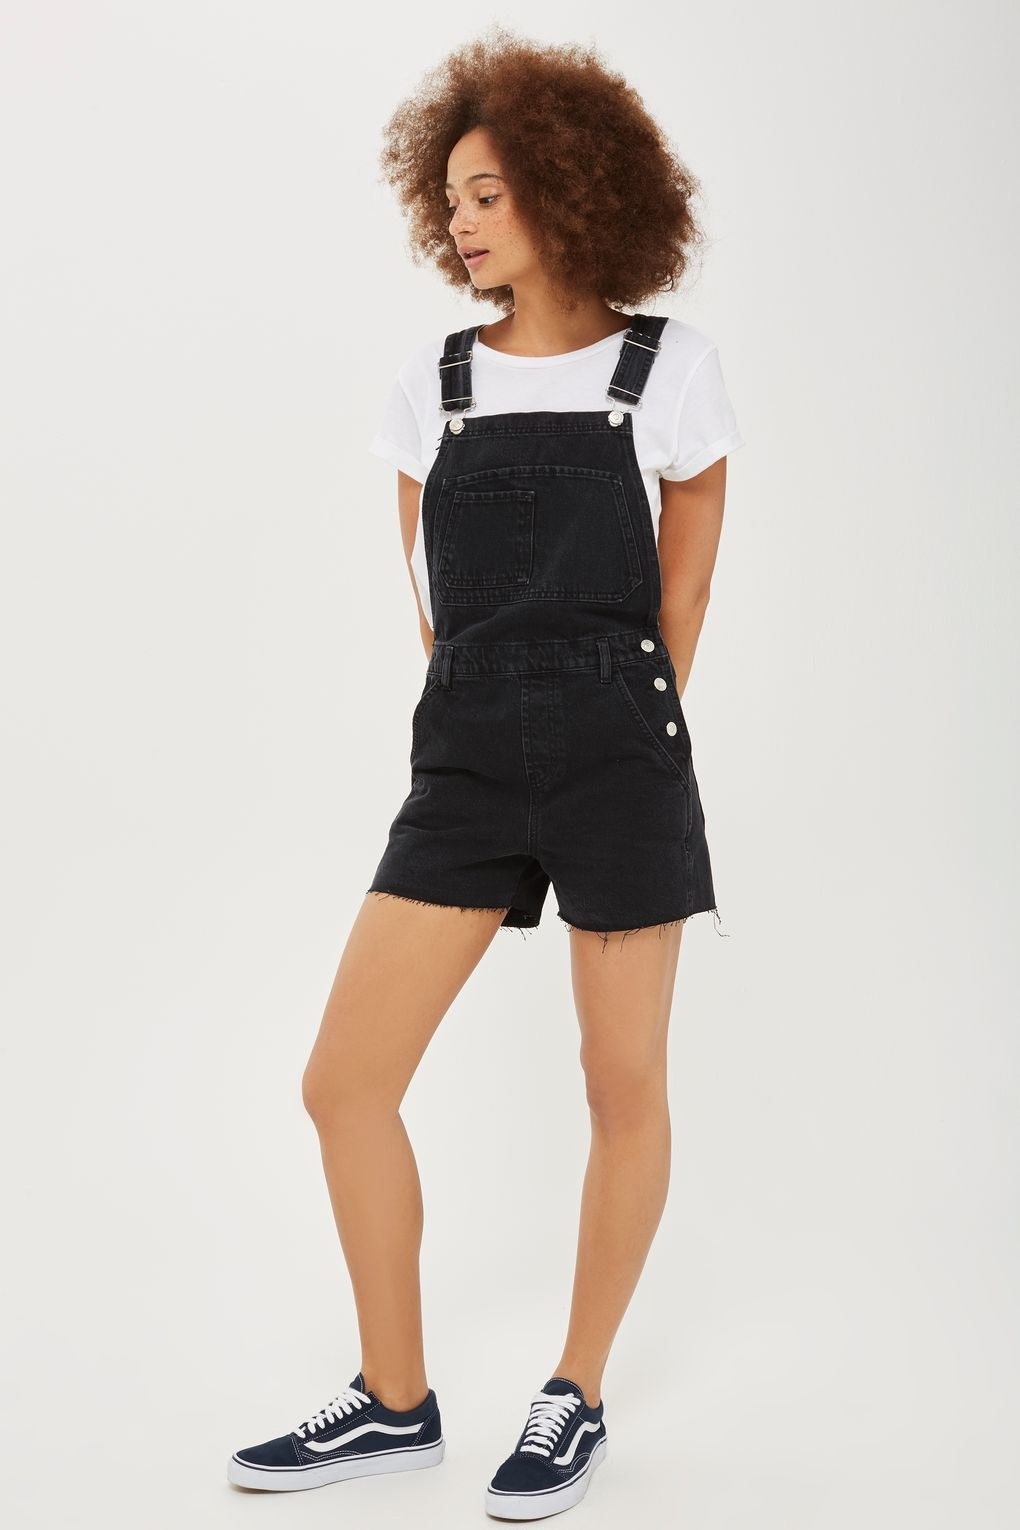 23 Pairs Of Overalls That'll Basically Make You Cry With Want